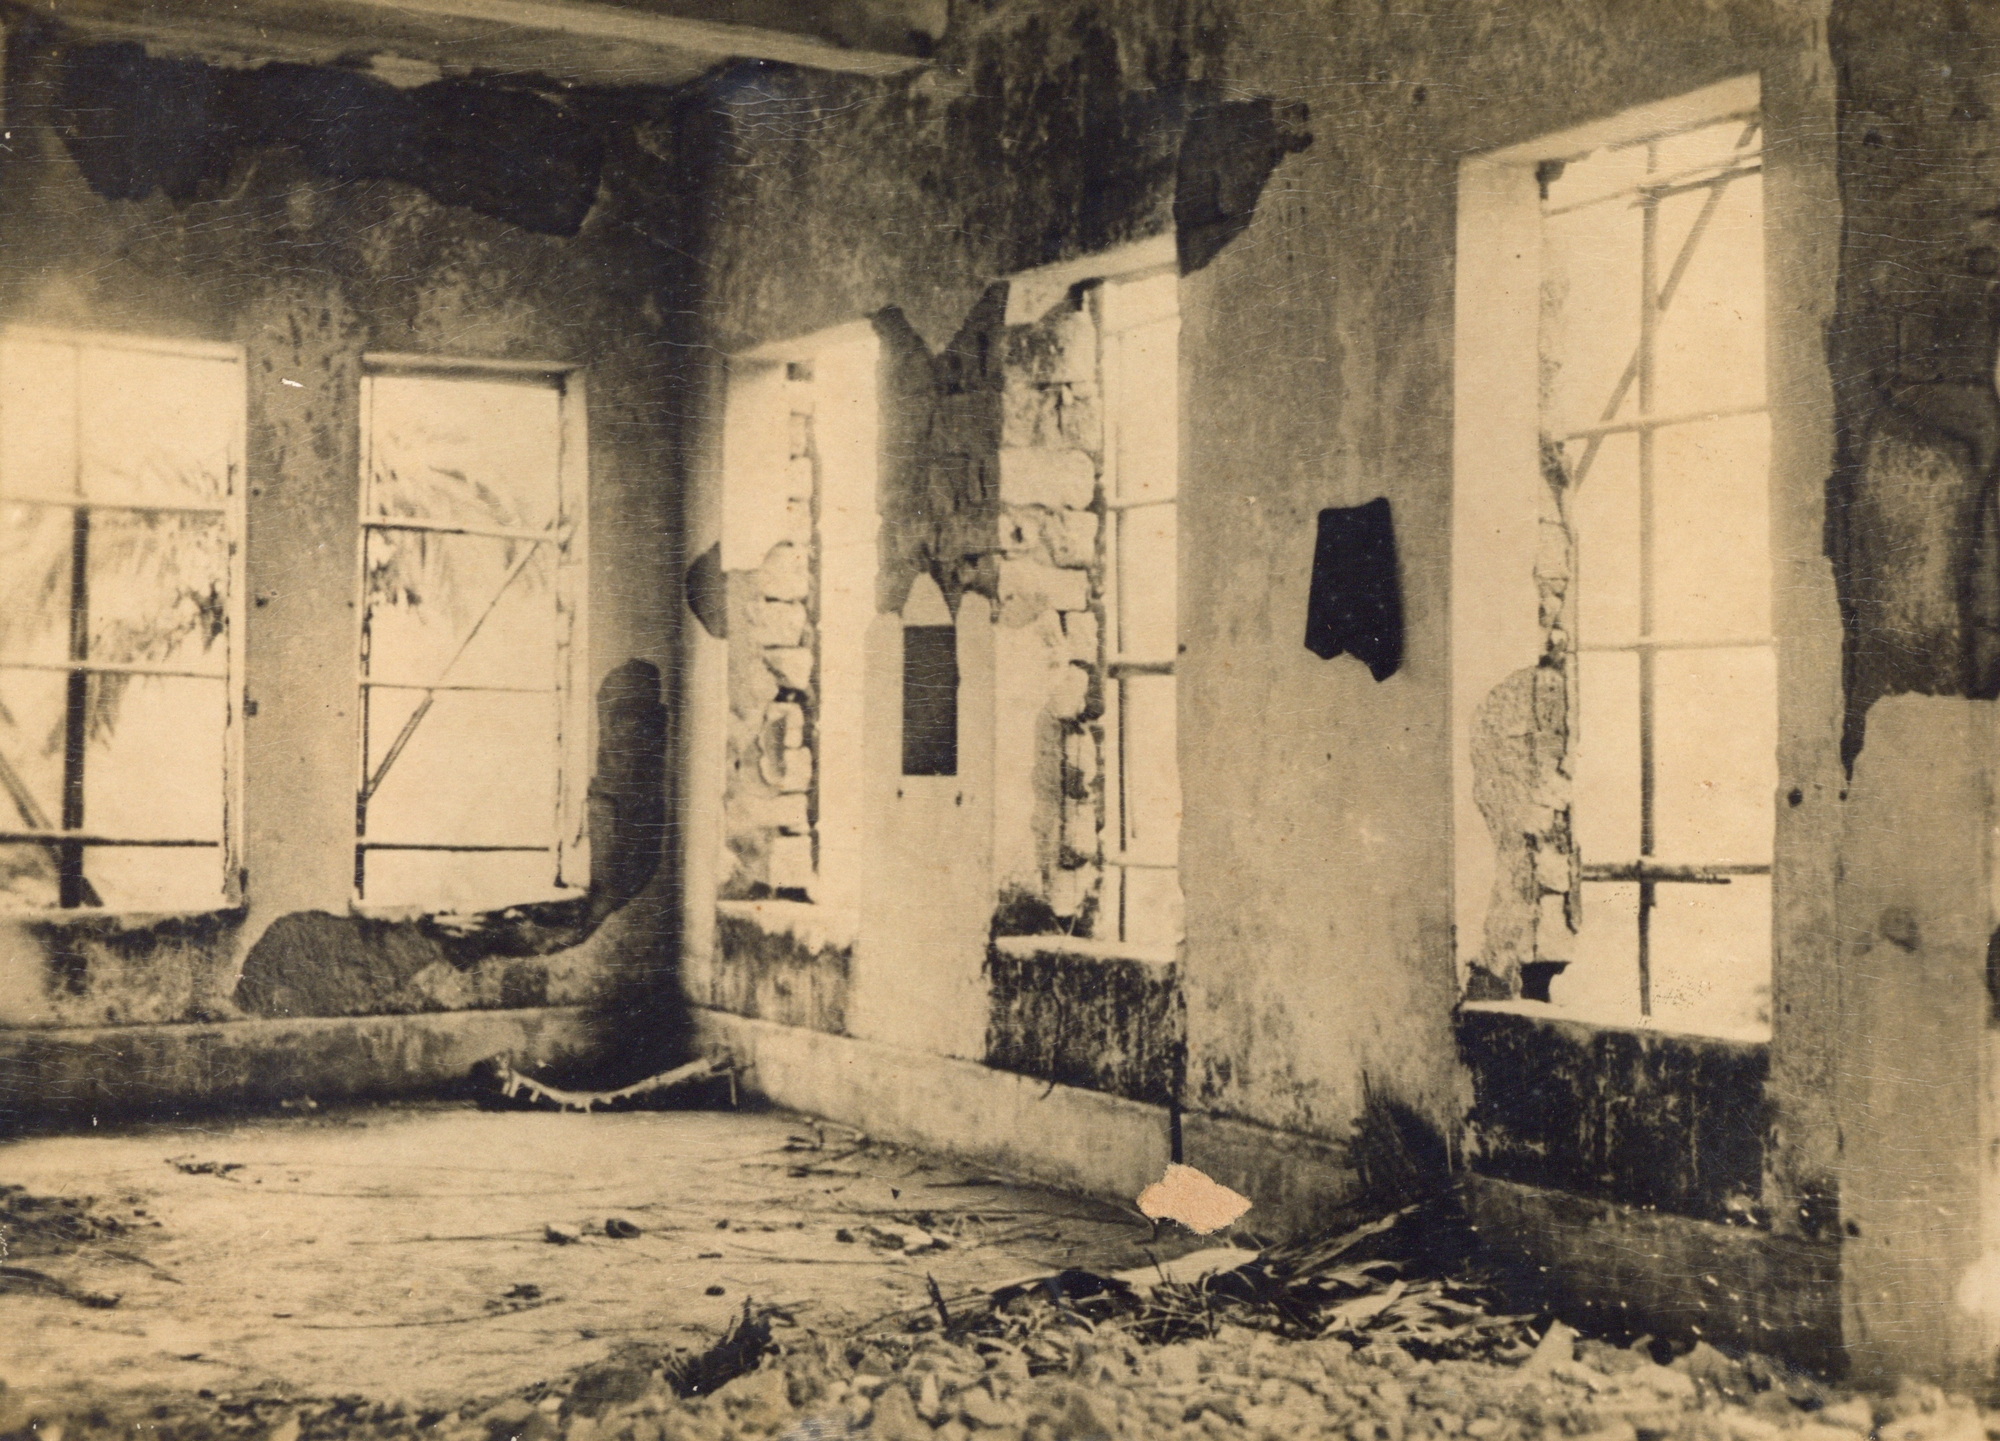 Interior of main building with ruined walls and stolen windows reviewing  the devastation during Japanese Occupation